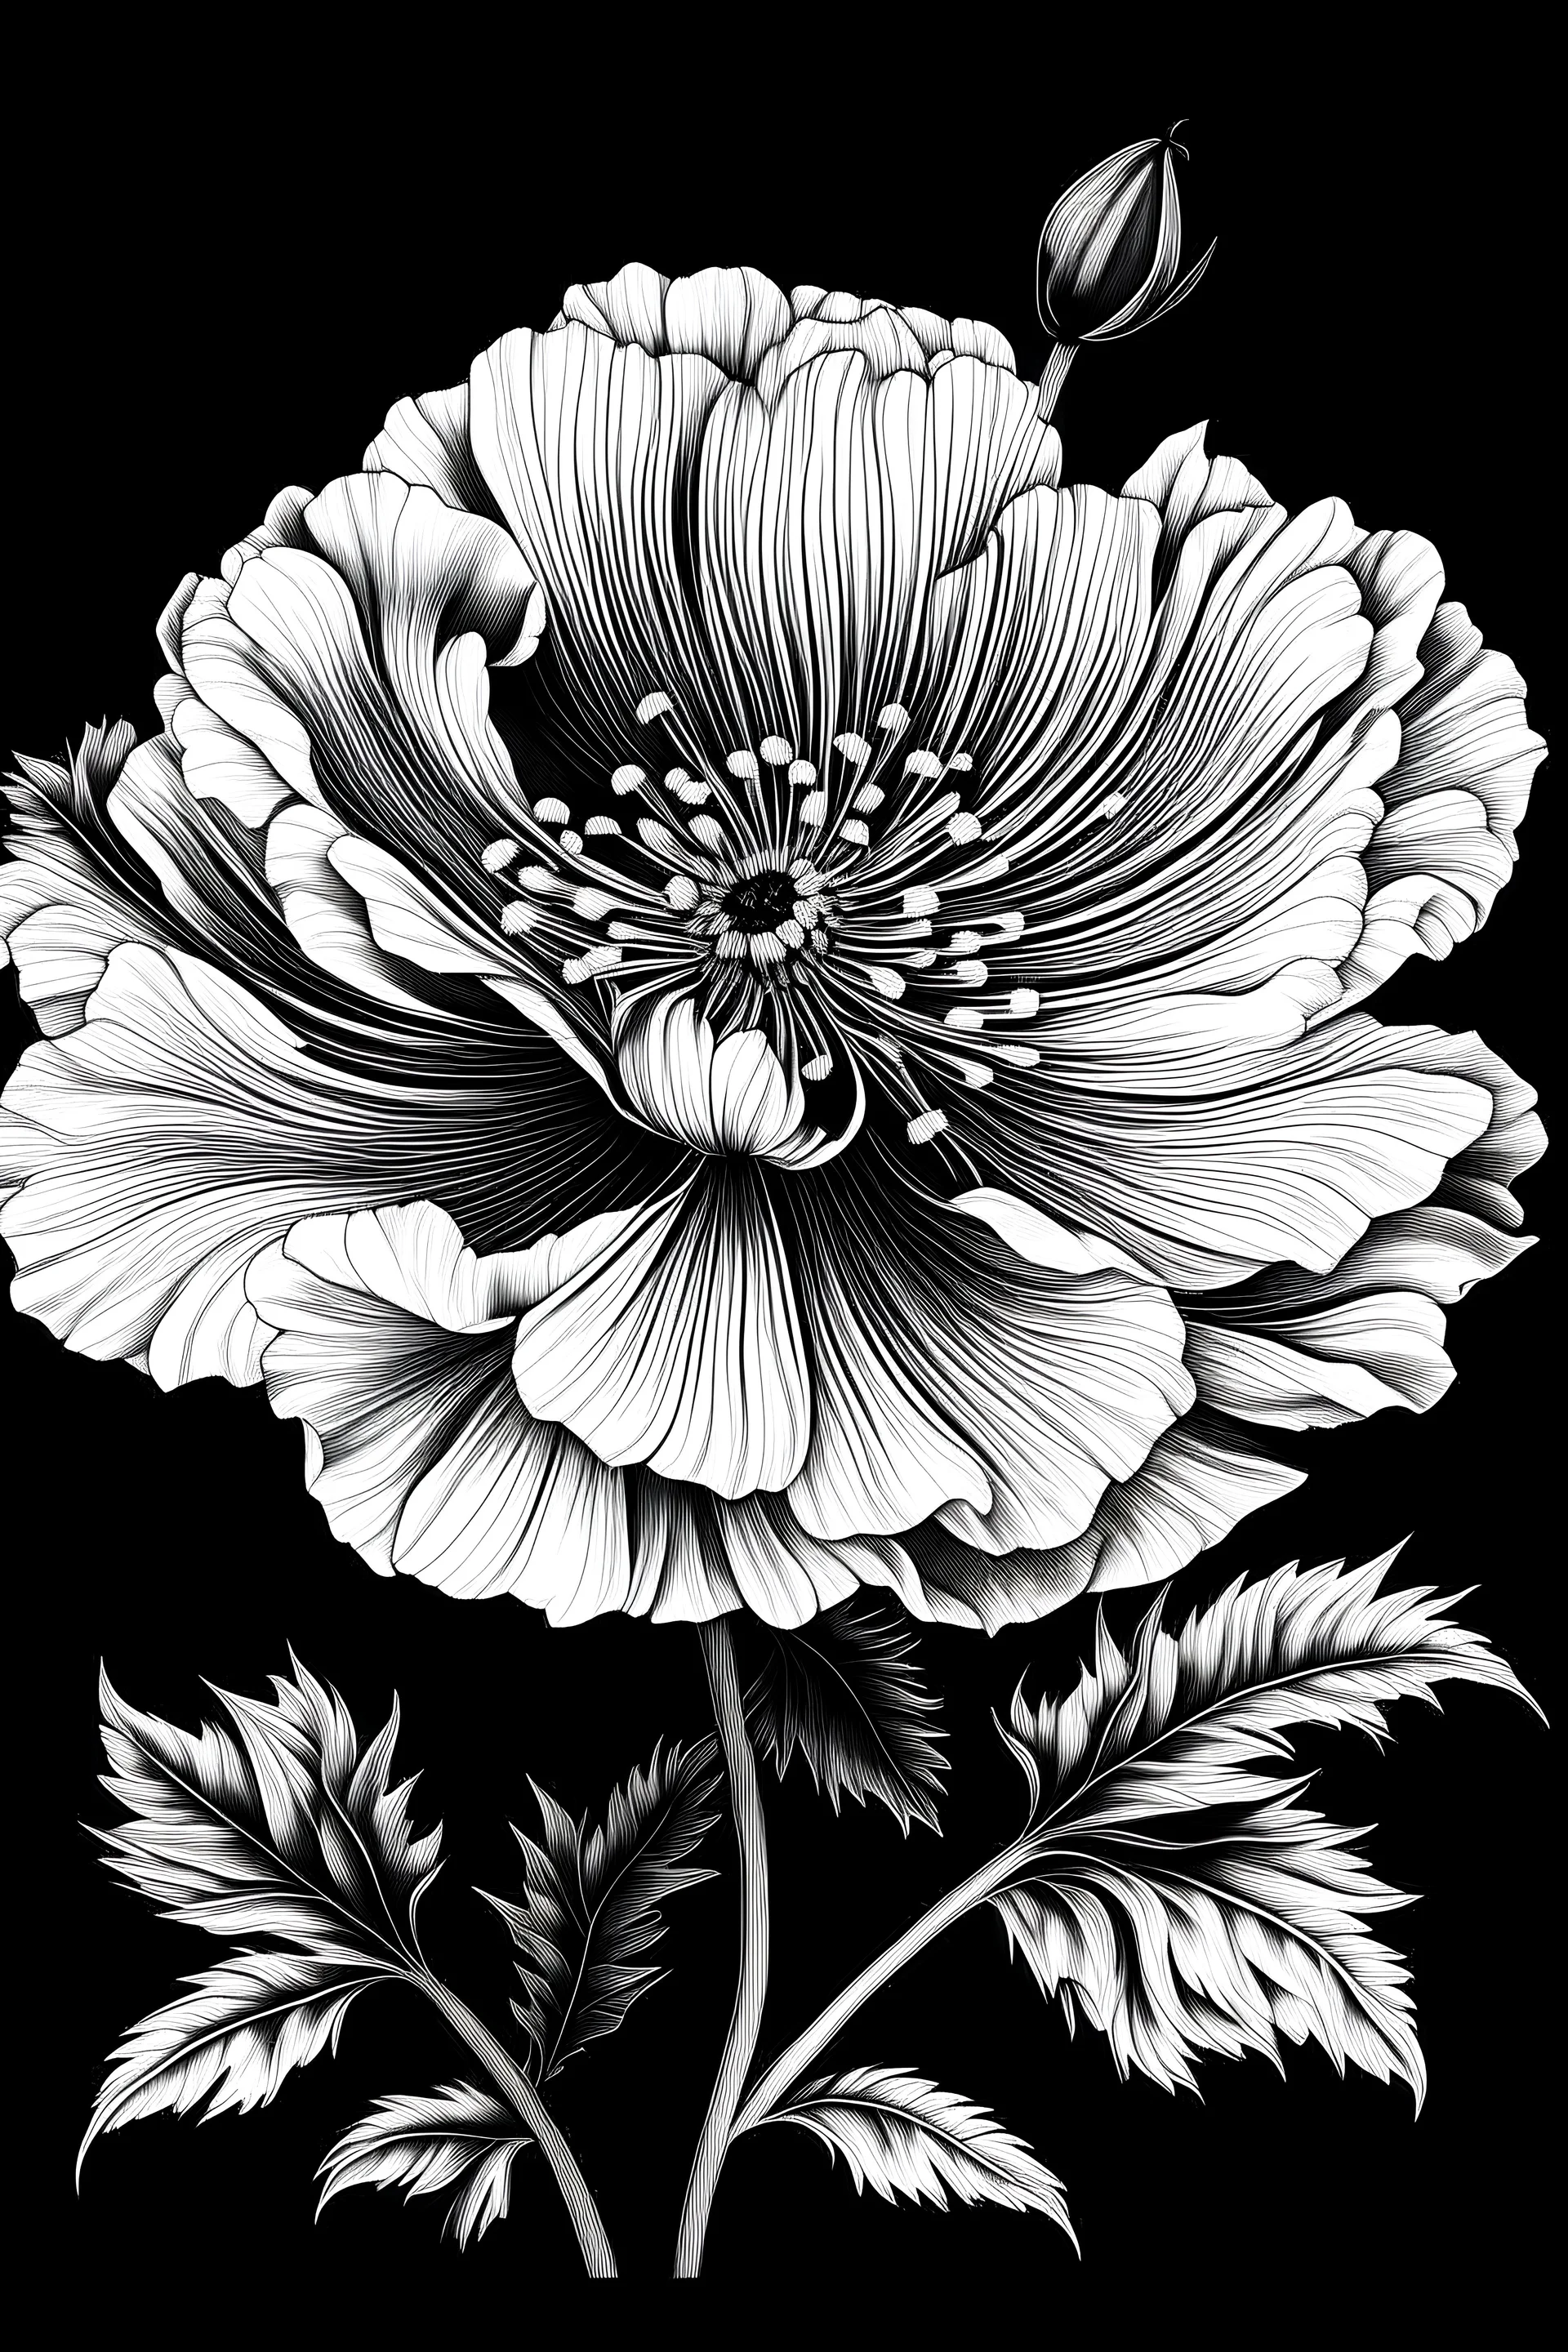 Ambrosia flower BLACK WITHE DRAWING